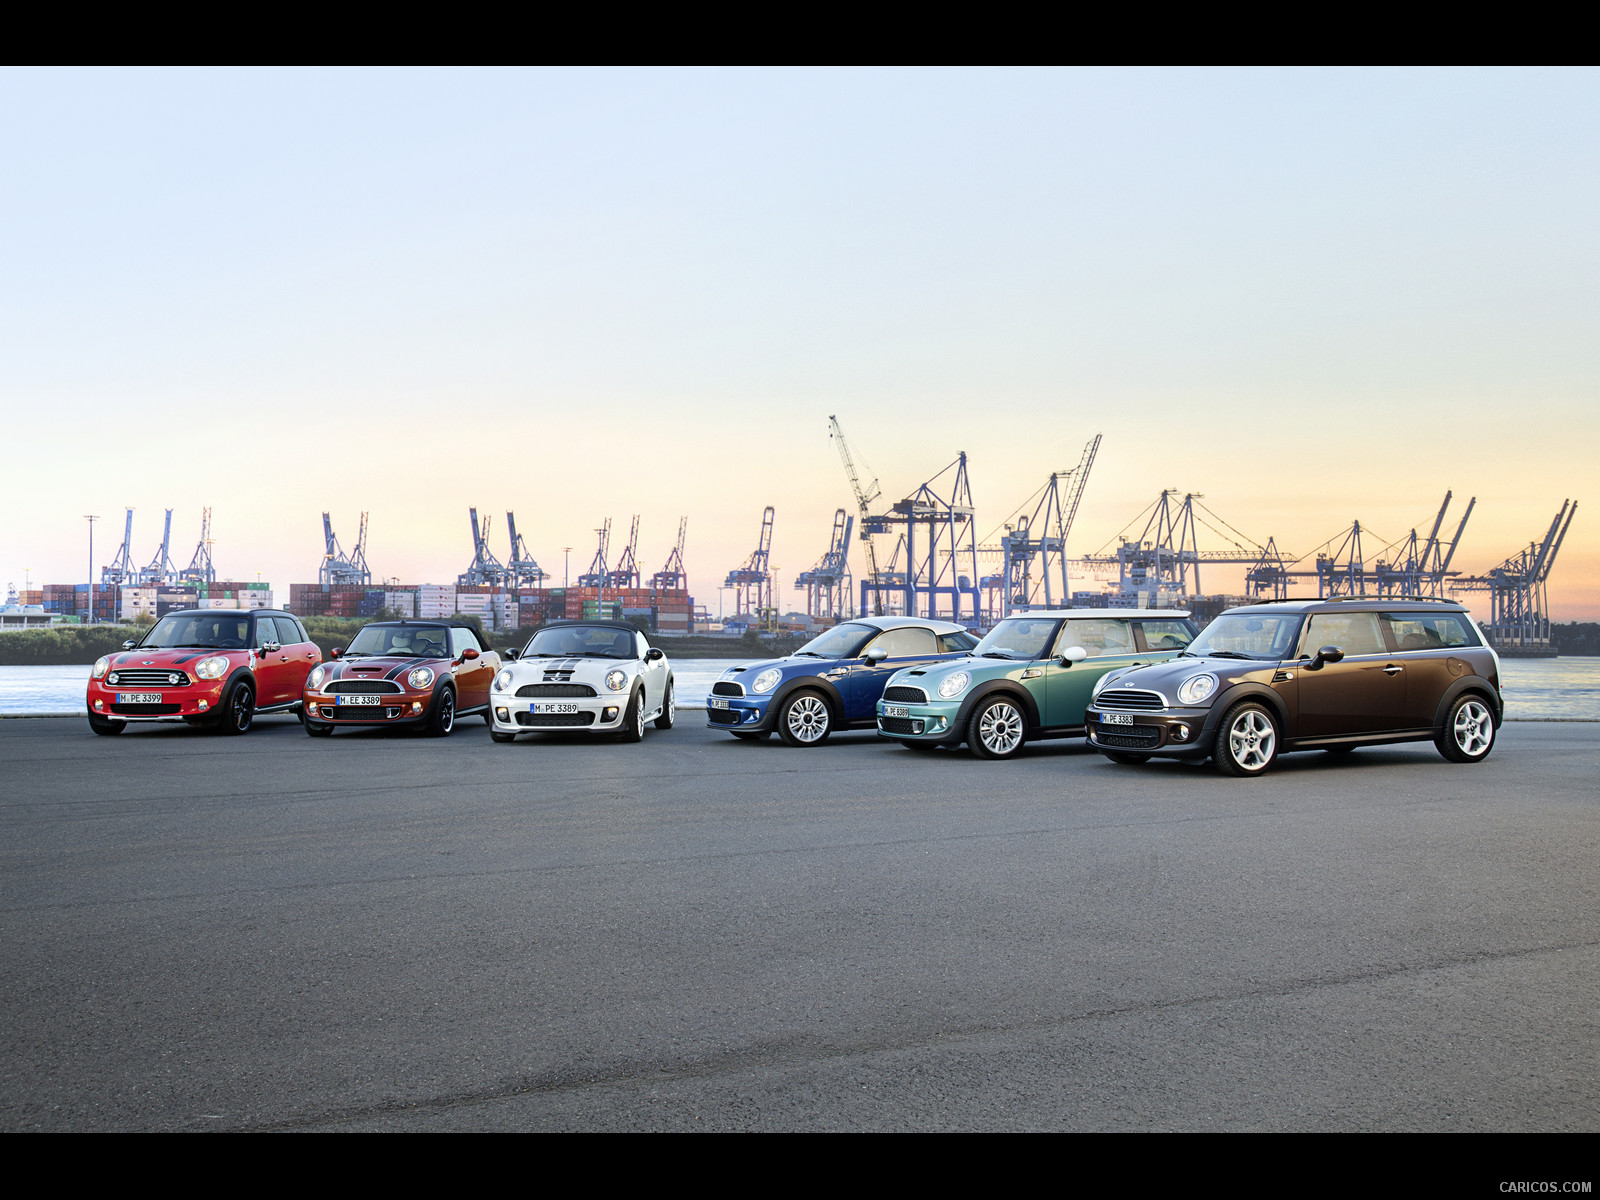 2012 MINI Roadster and family - , #206 of 389